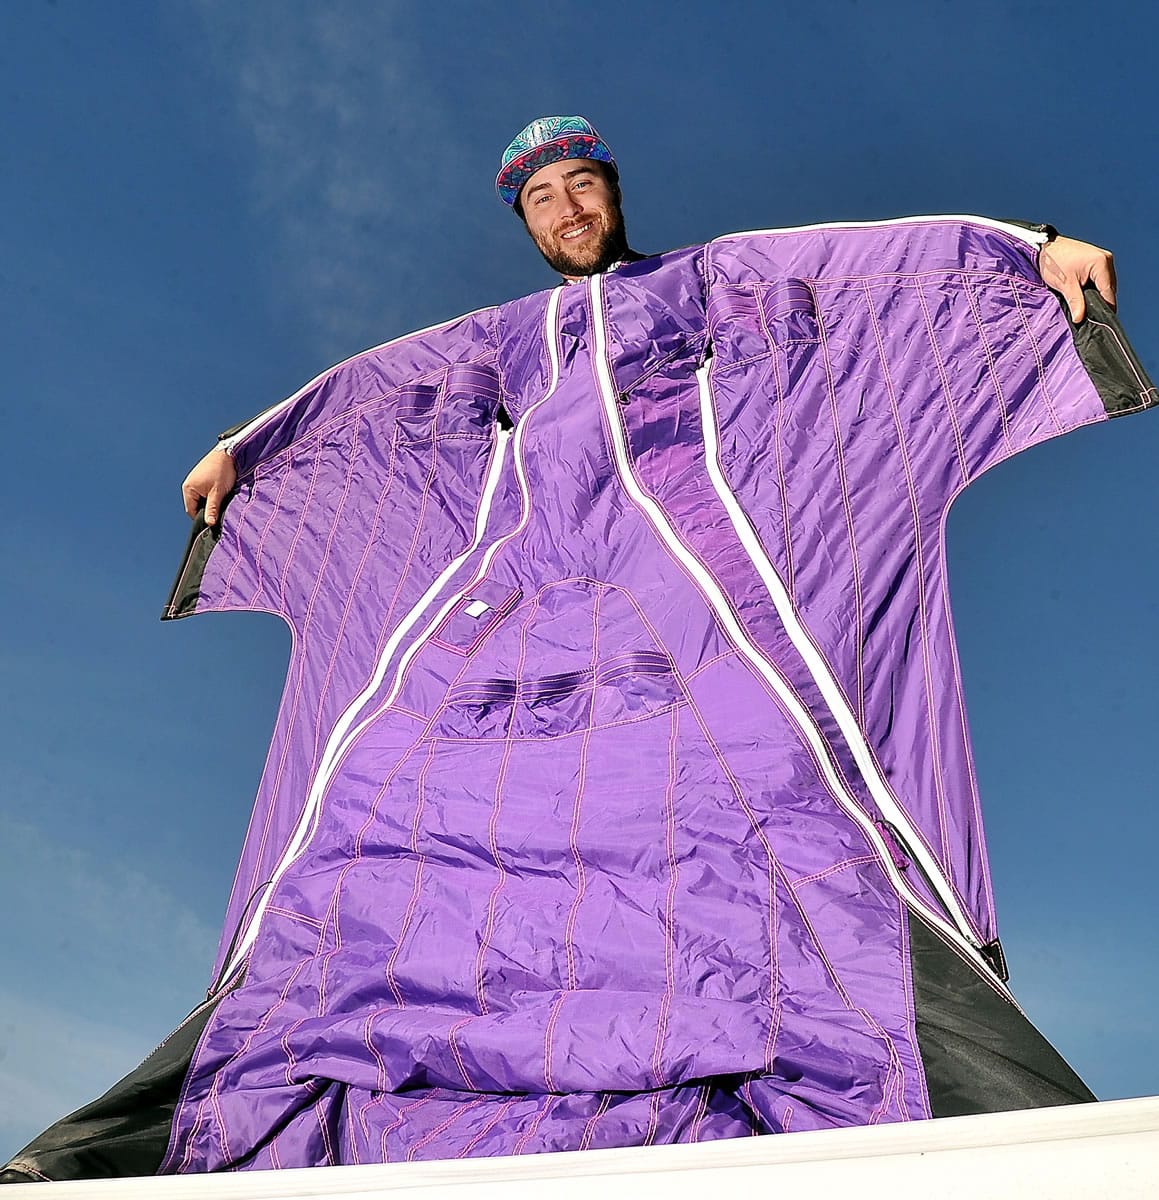 Blake Burwell, 31, shows off his wing suit Monday at his home in Talent, Ore.